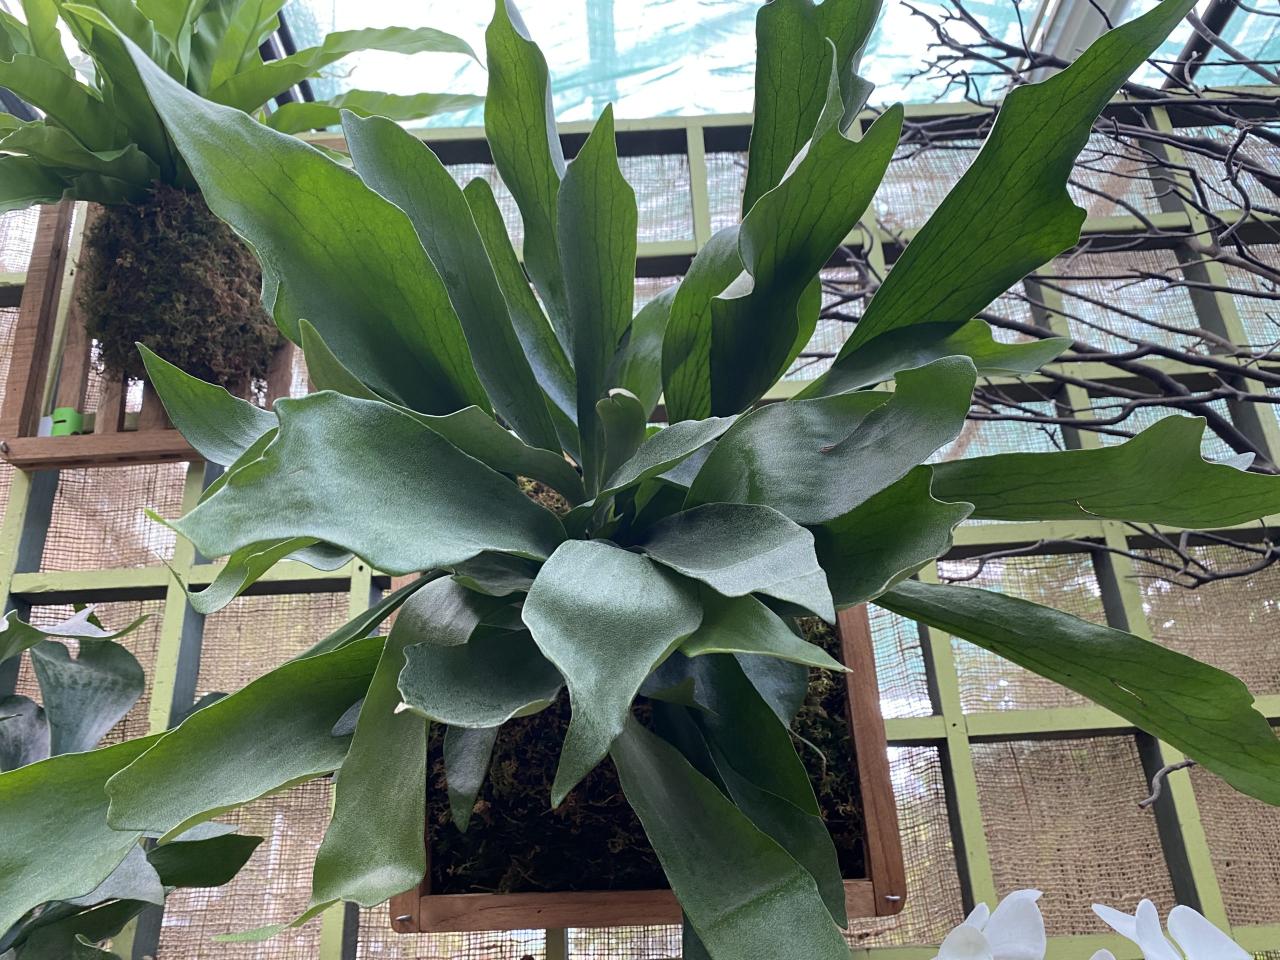 Fern staghorn ferns care tree hanging basket grow shade vegetated grows